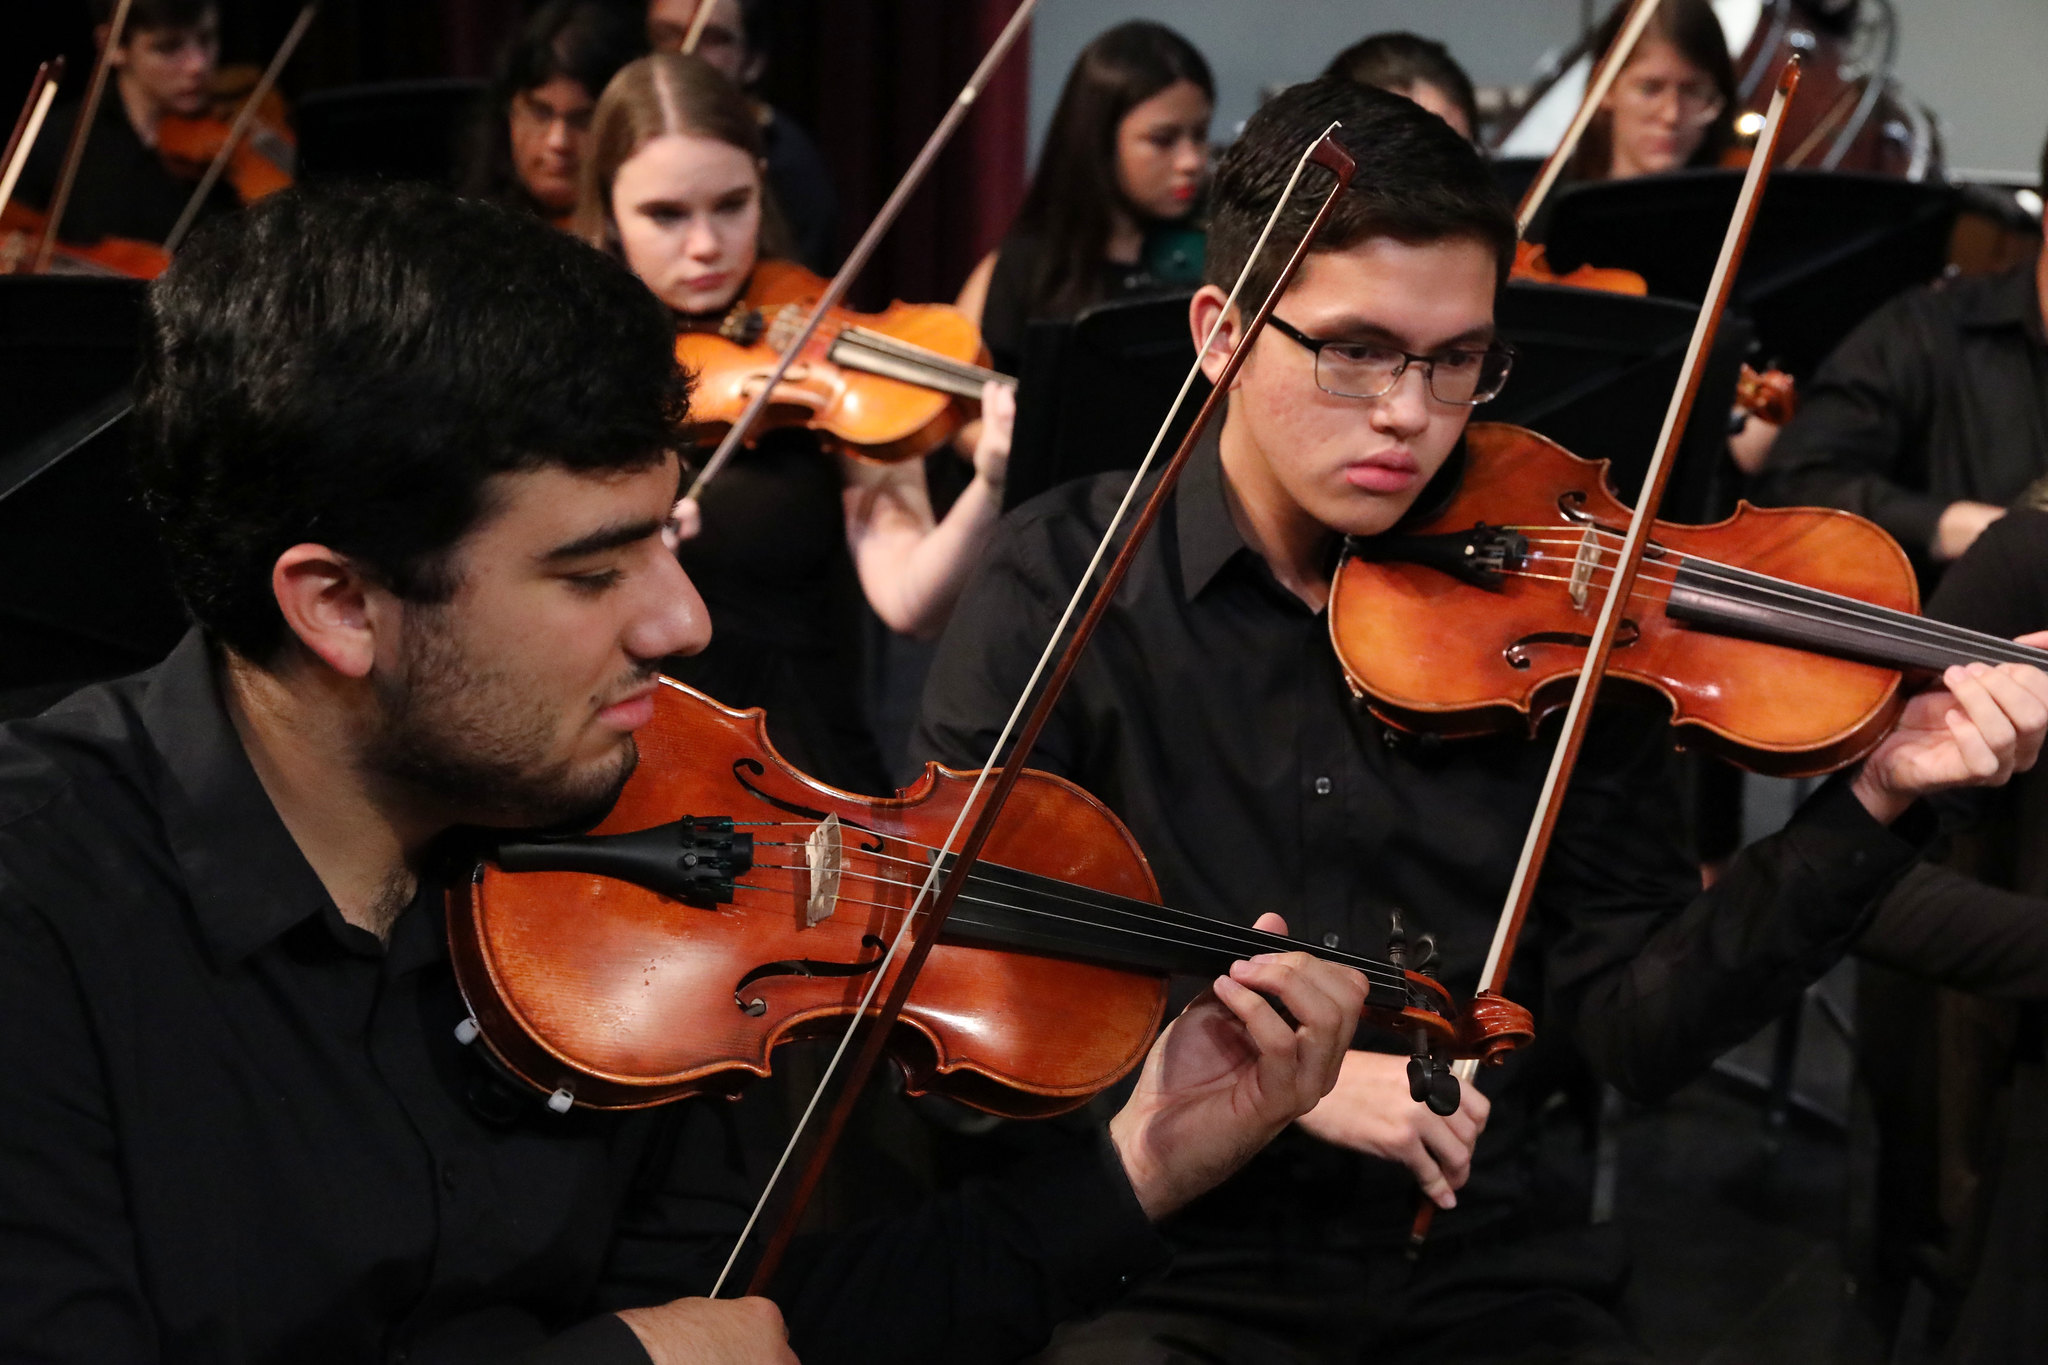 Two students dressed in all black while they play their violins at an orchestra performance